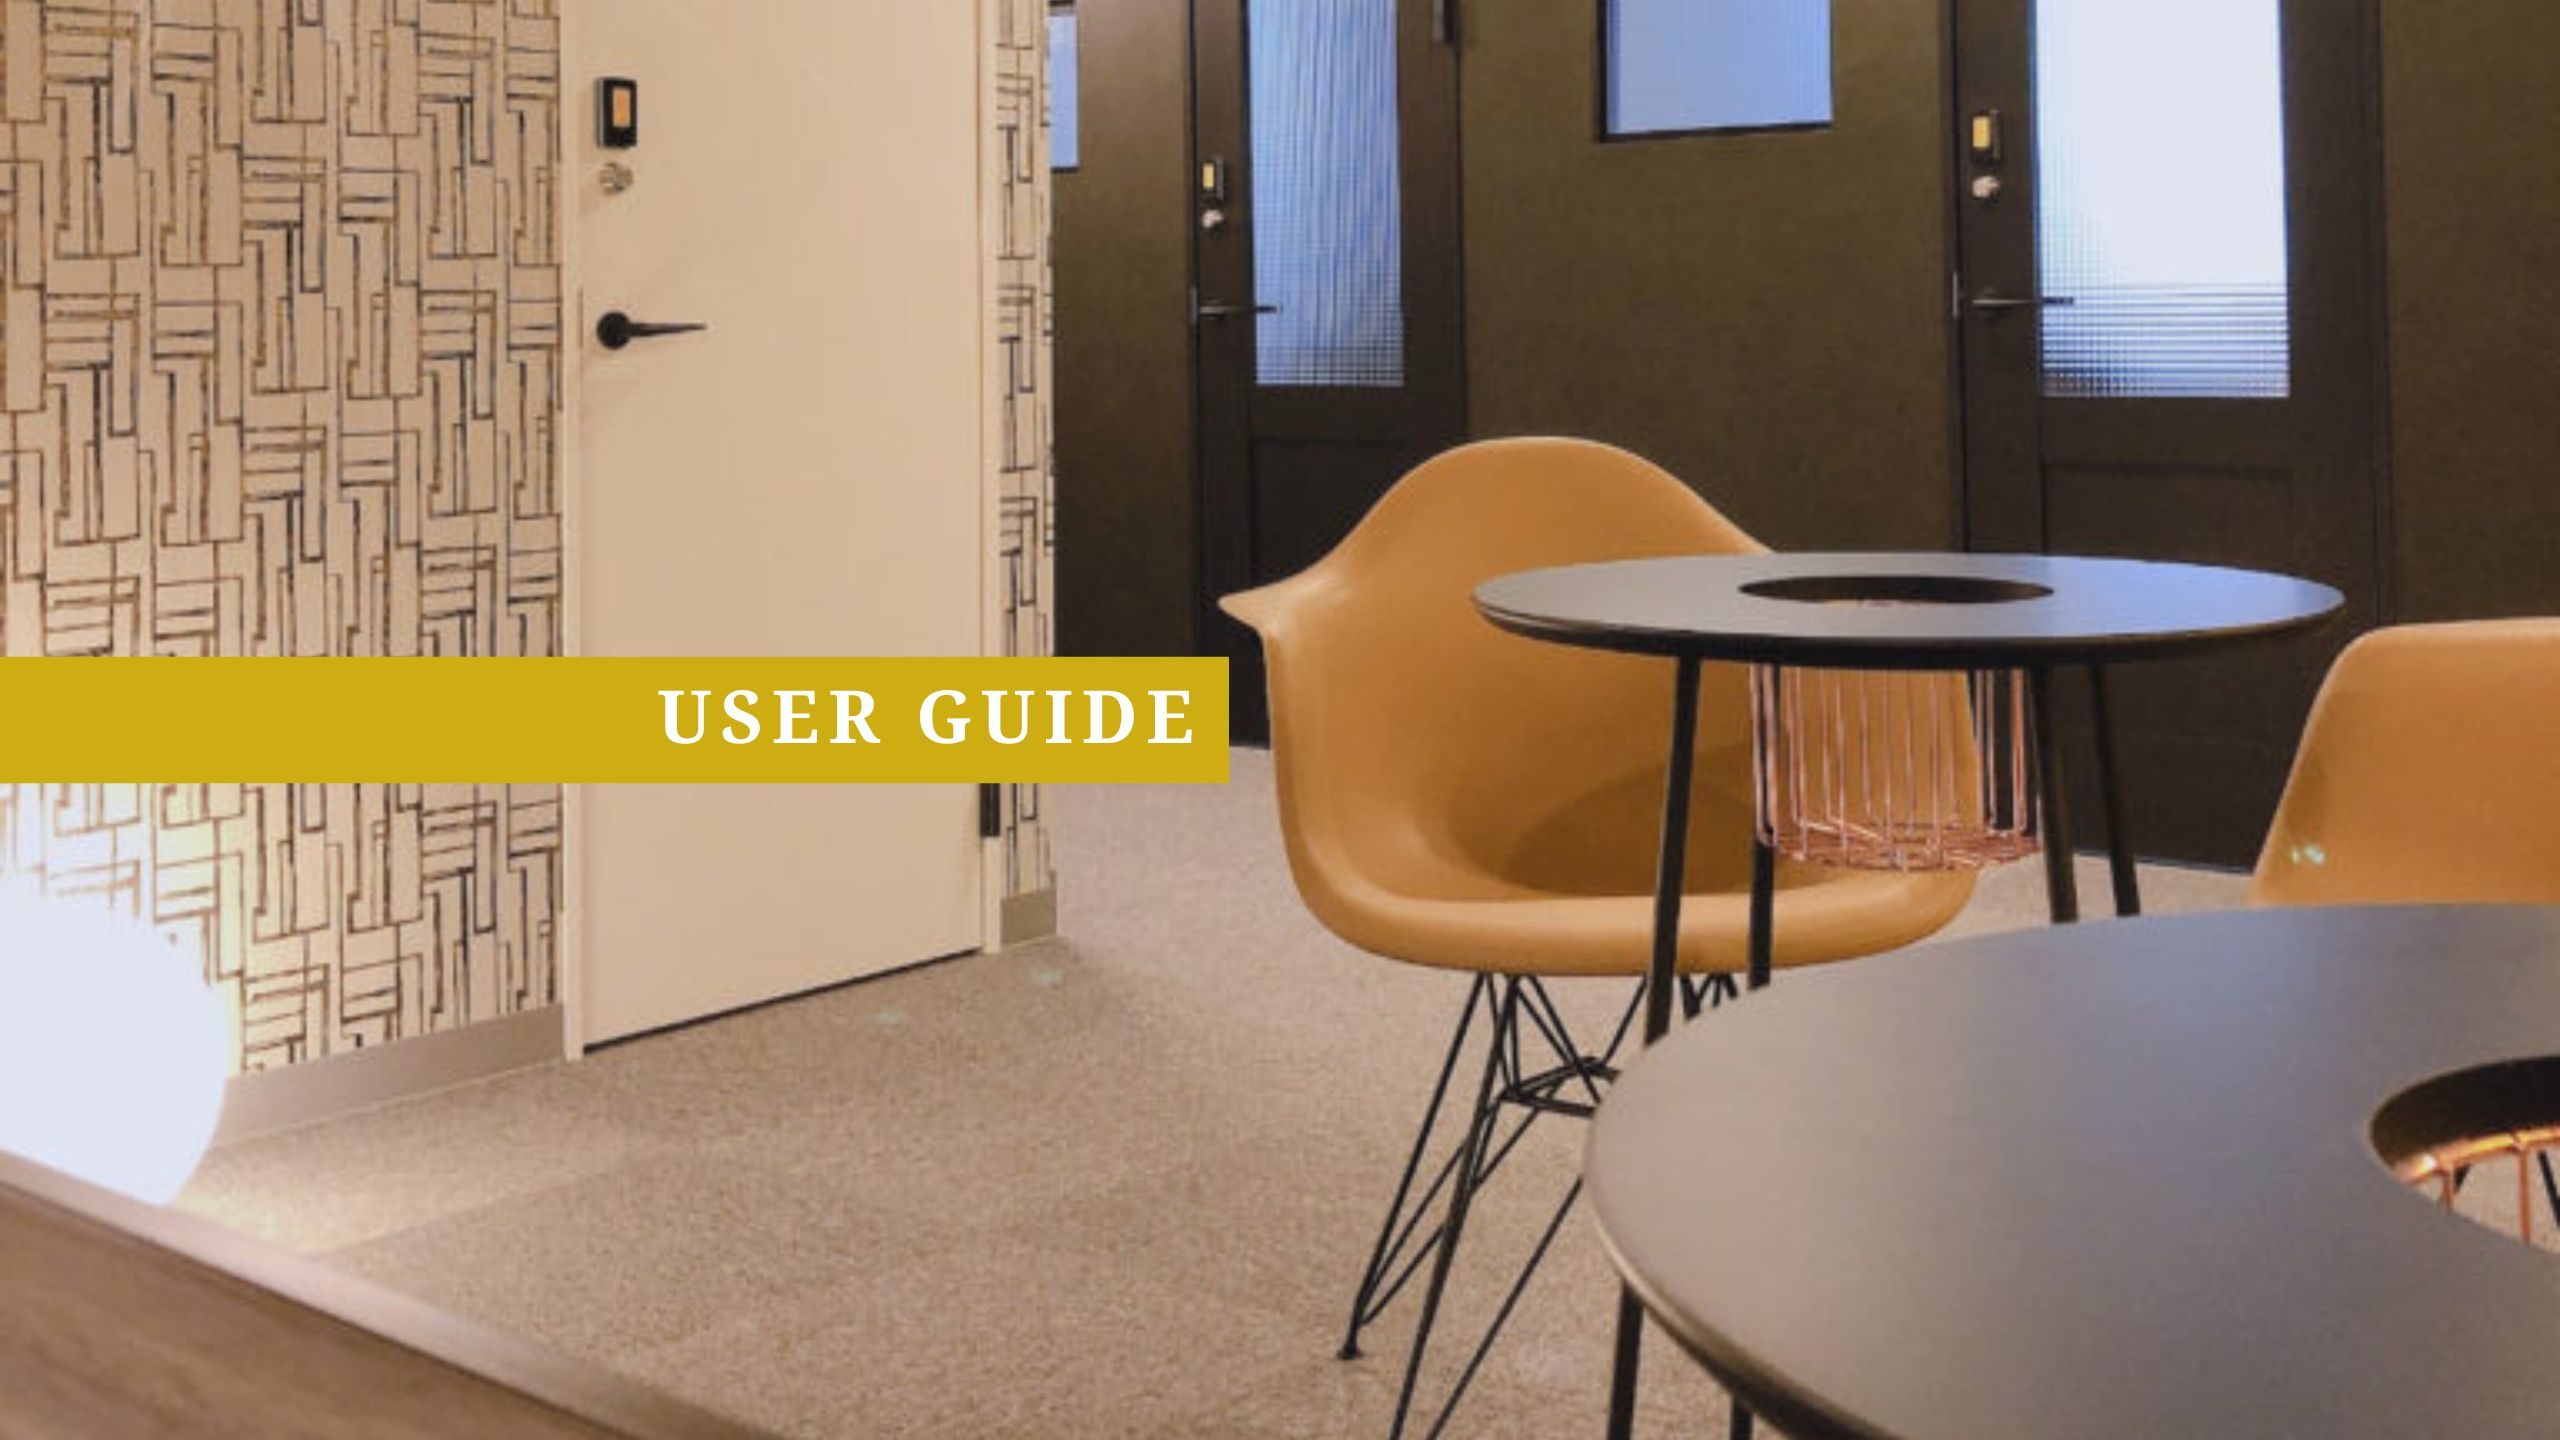 USER GUIDE～ご利用案内